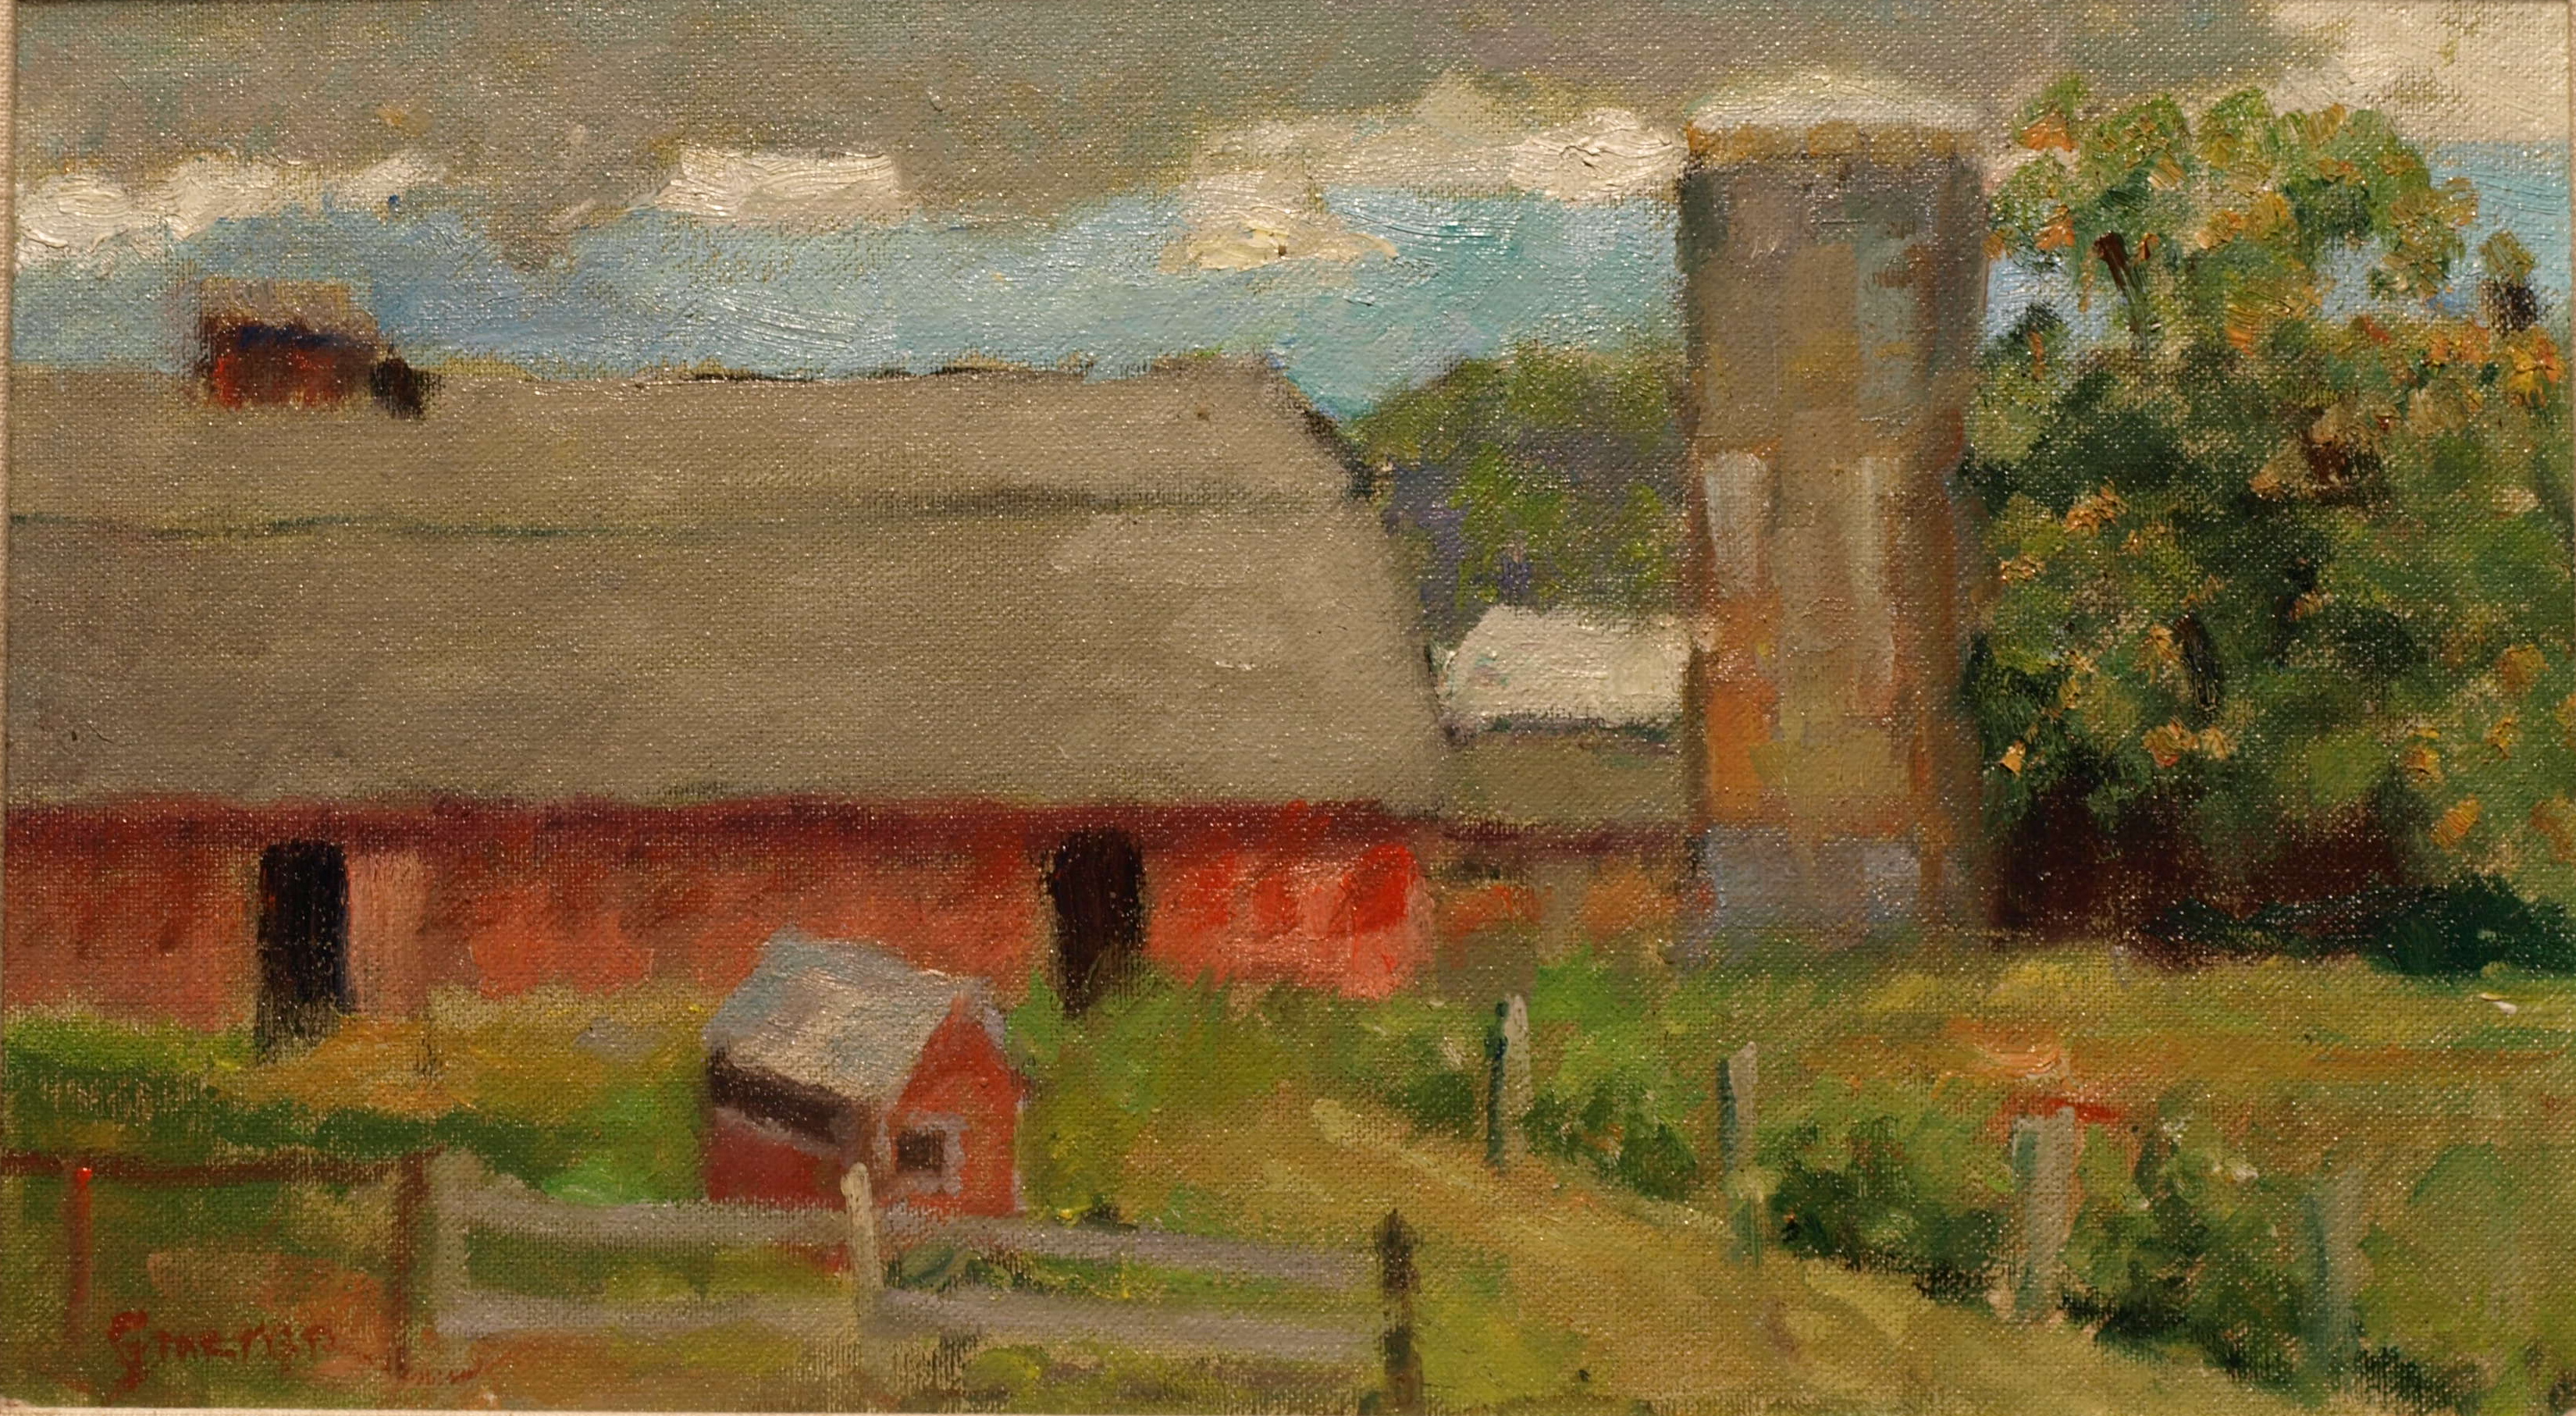 Curtis Road Farm, Oil on Canvas on Panel, 8 x 14 Inches, by Richard Stalter, $220